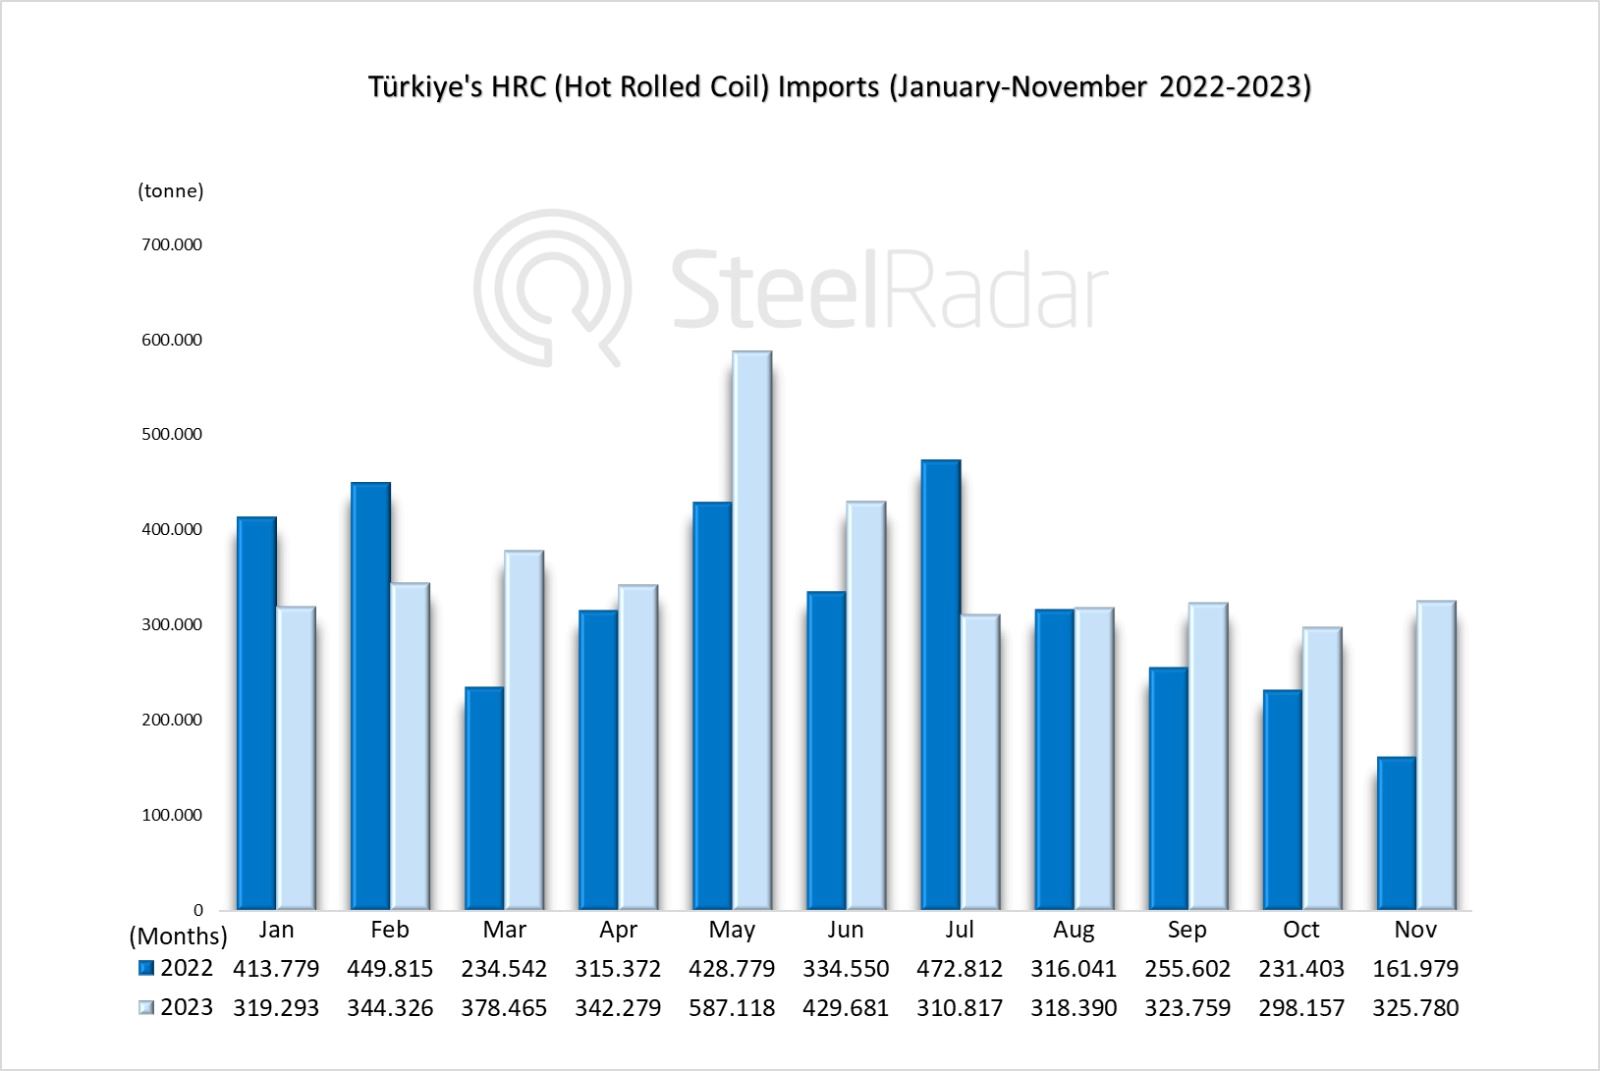 Türkiye's HRC imports increased by 10.05% in the January-November period